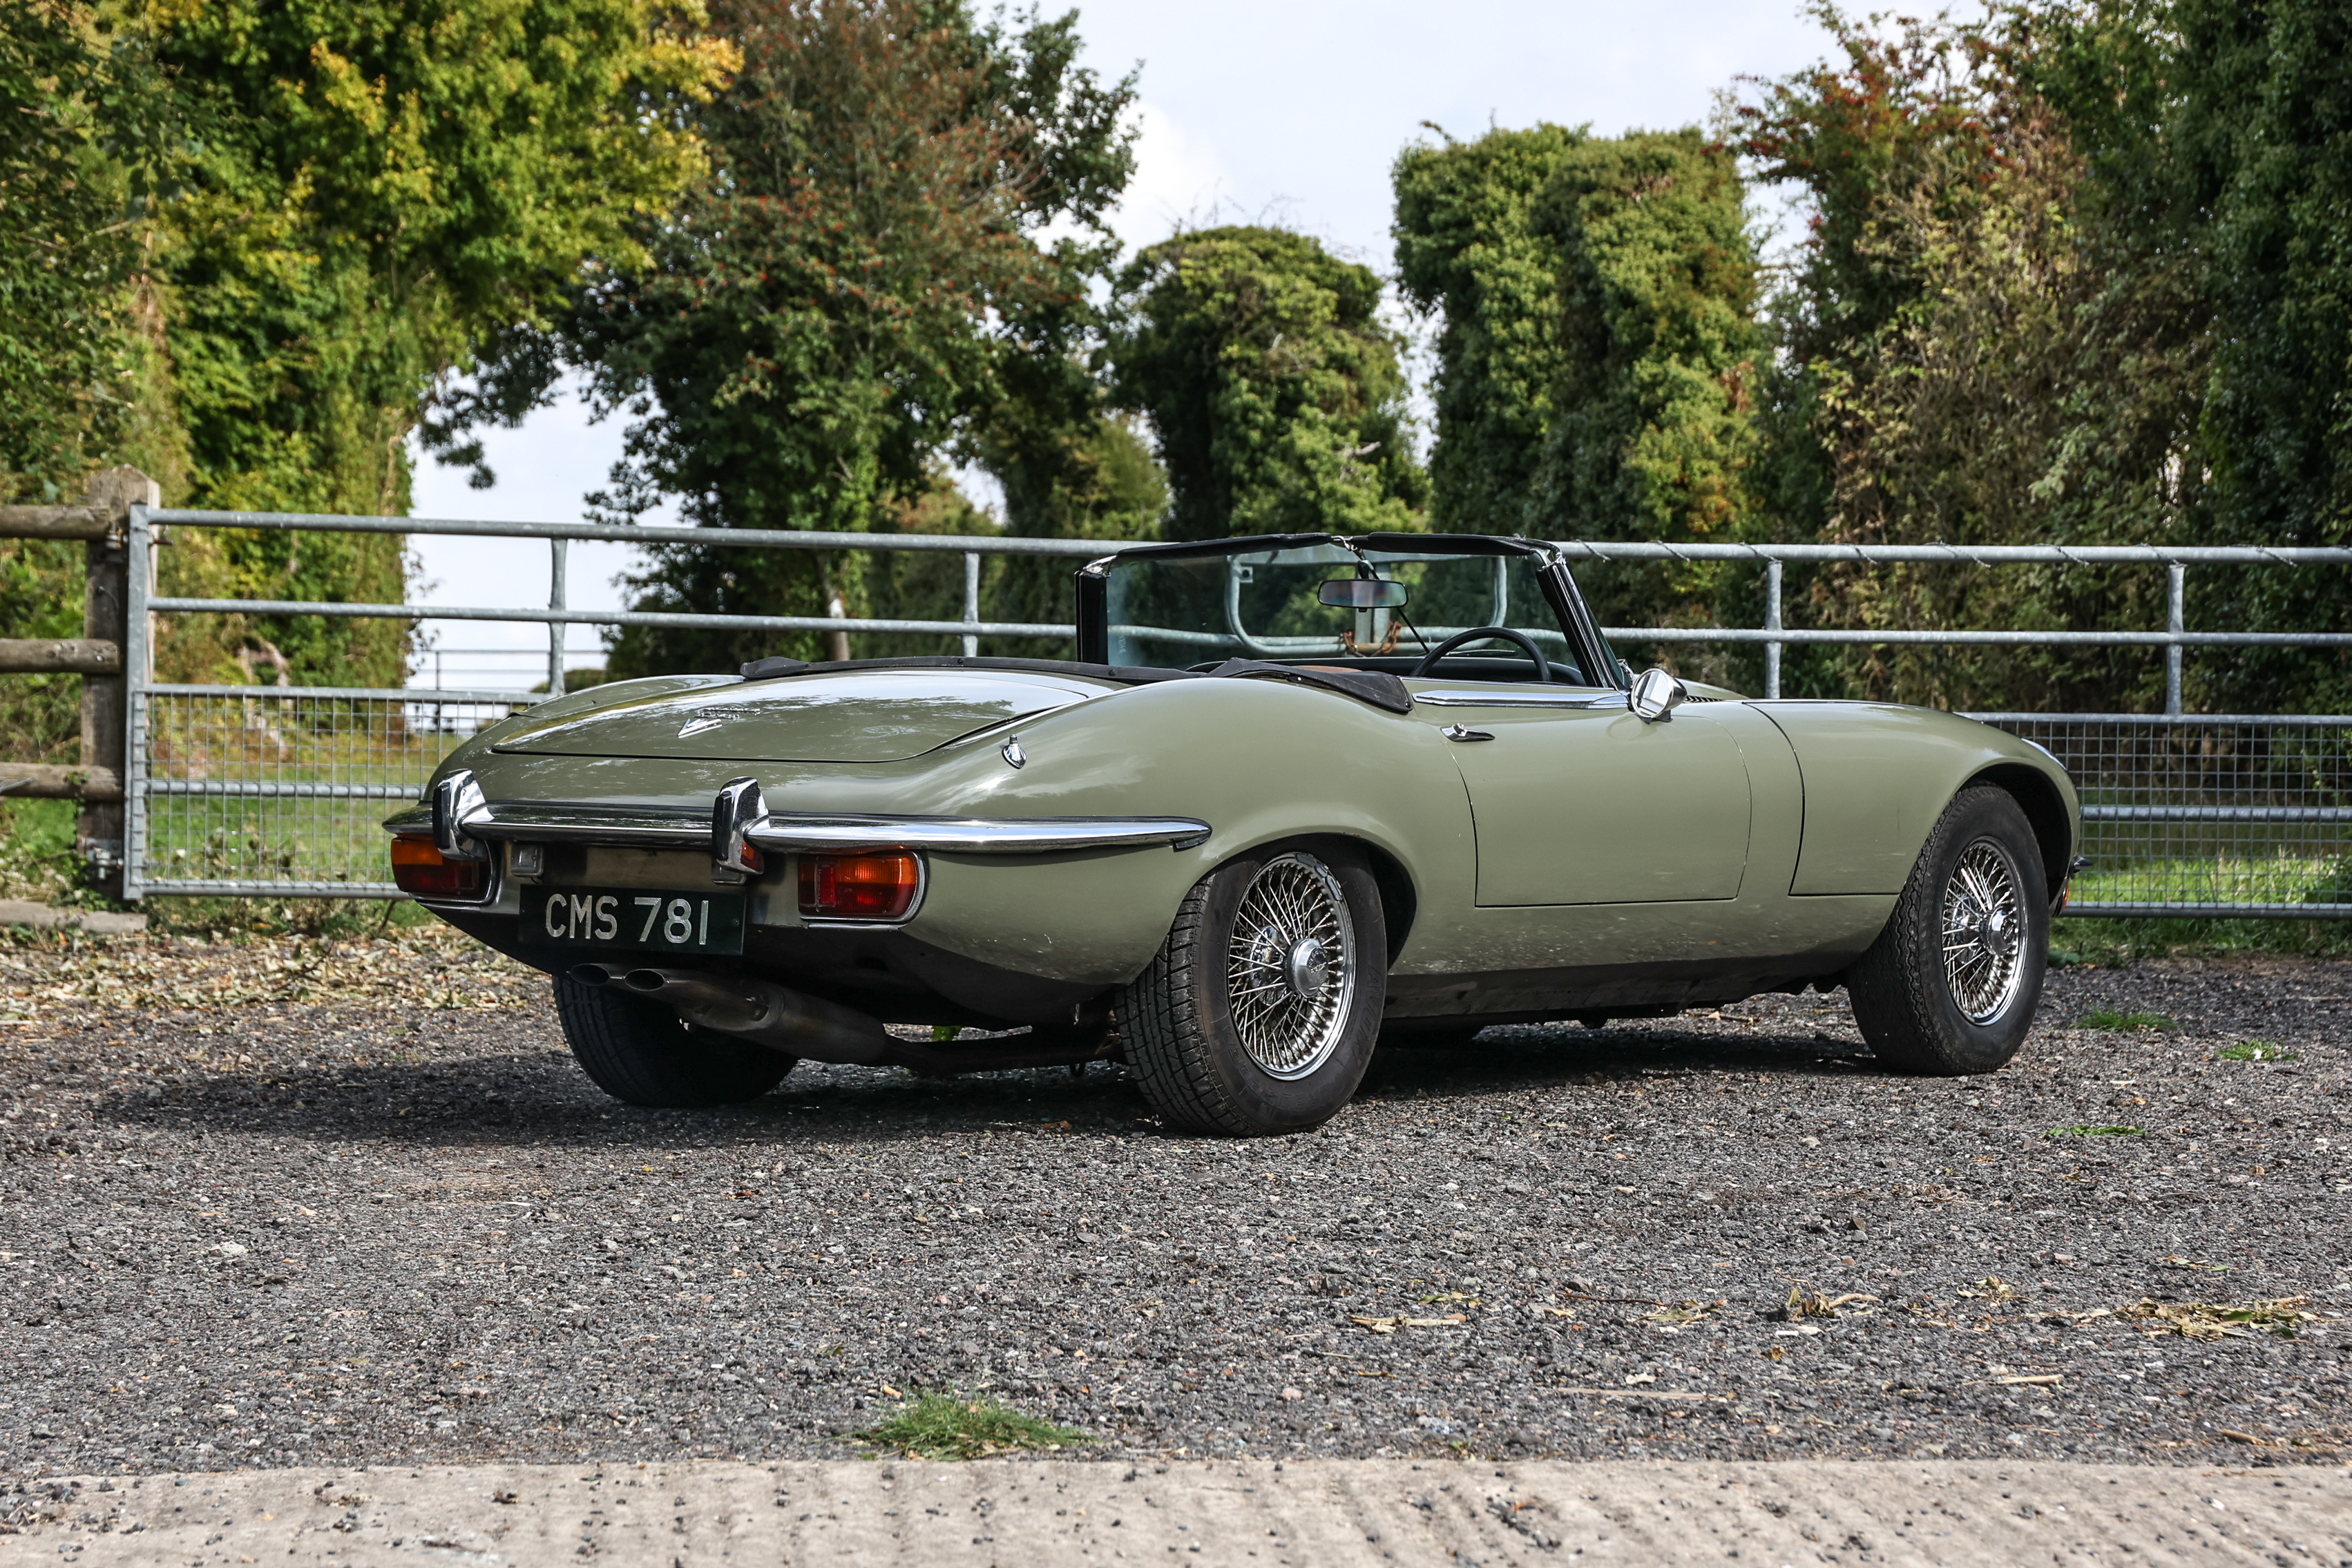 1973 JAGUAR E-TYPE SERIES III ROADSTER Registration Number: CMS 781 Chassis Number: 1S1868 - Image 13 of 22